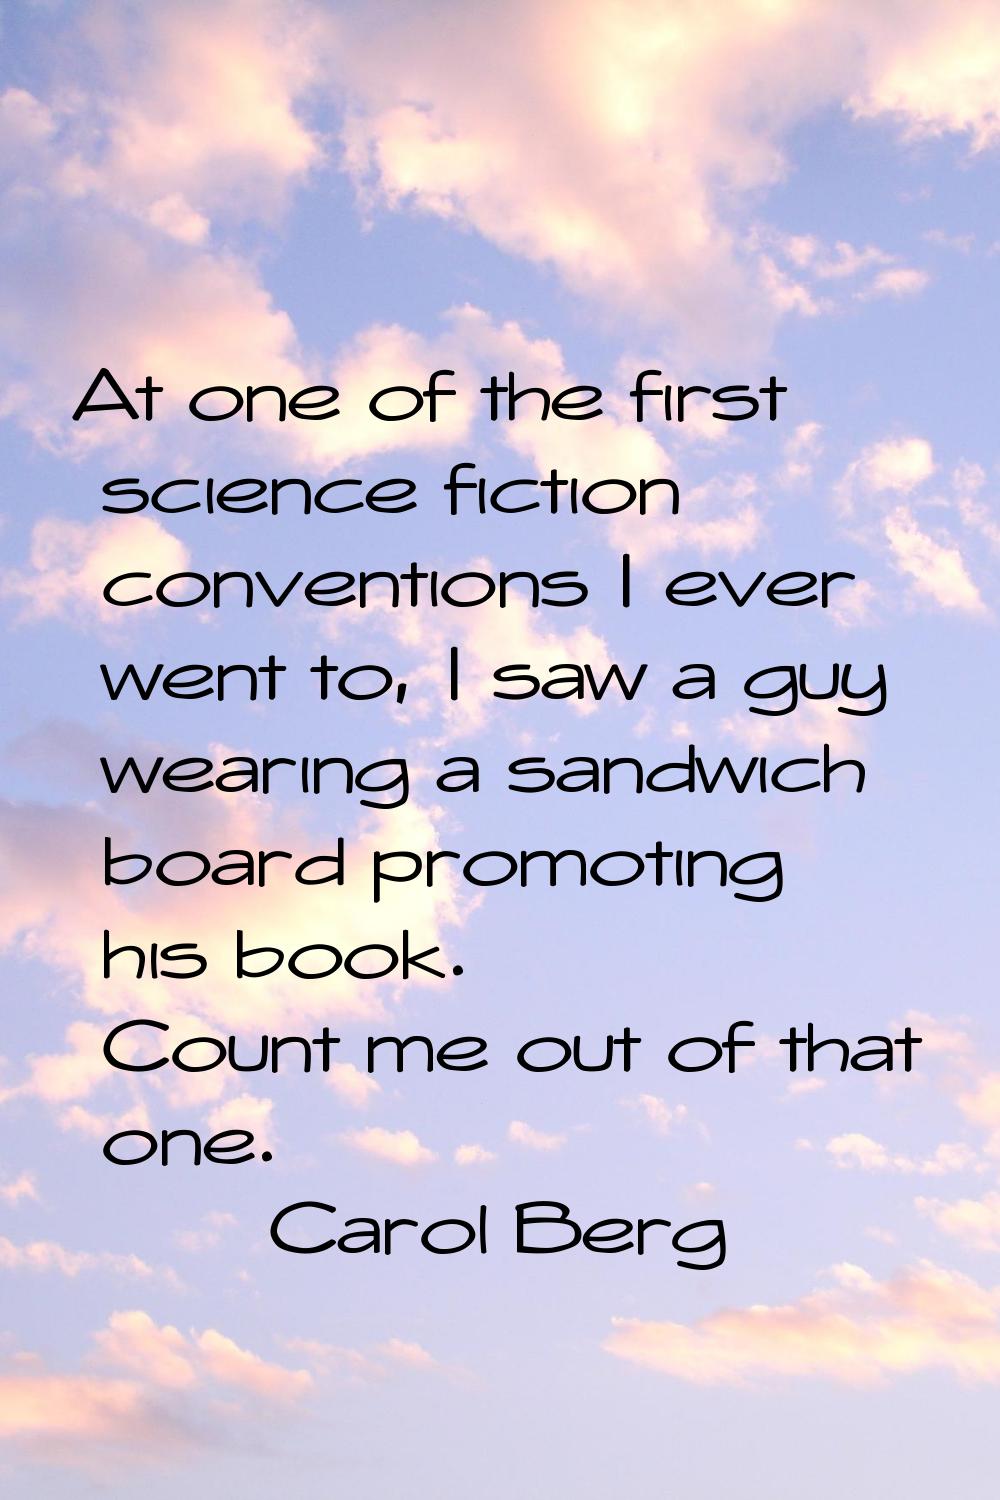 At one of the first science fiction conventions I ever went to, I saw a guy wearing a sandwich boar